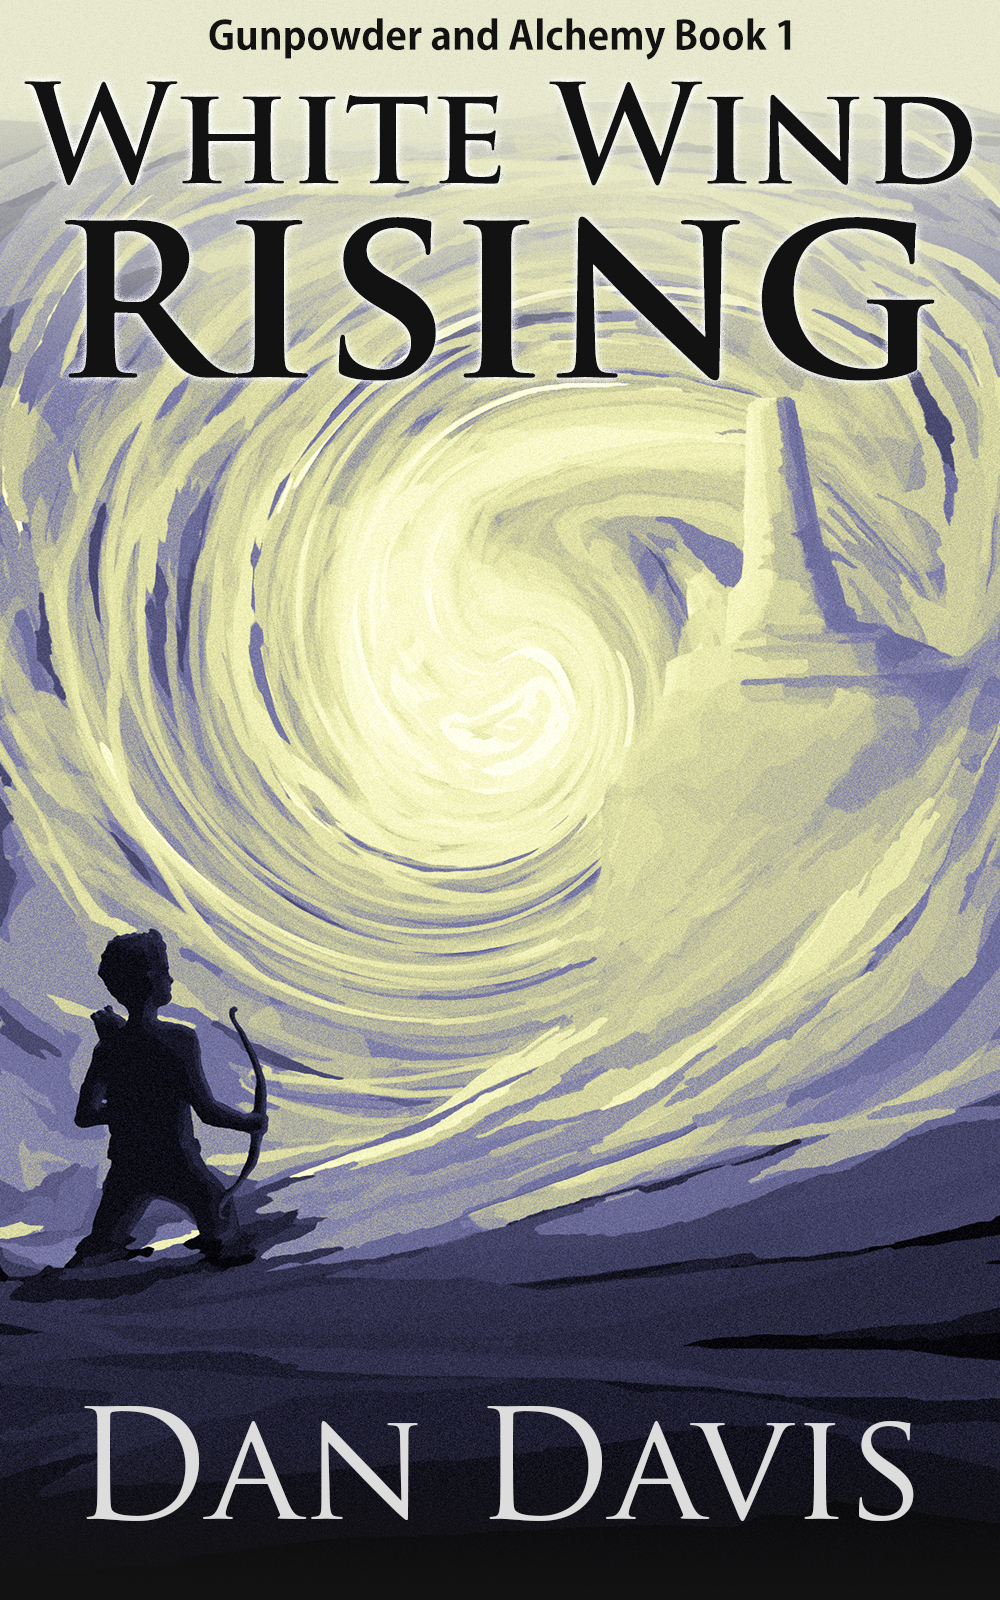 White Wind Rising Free on Amazon right now!